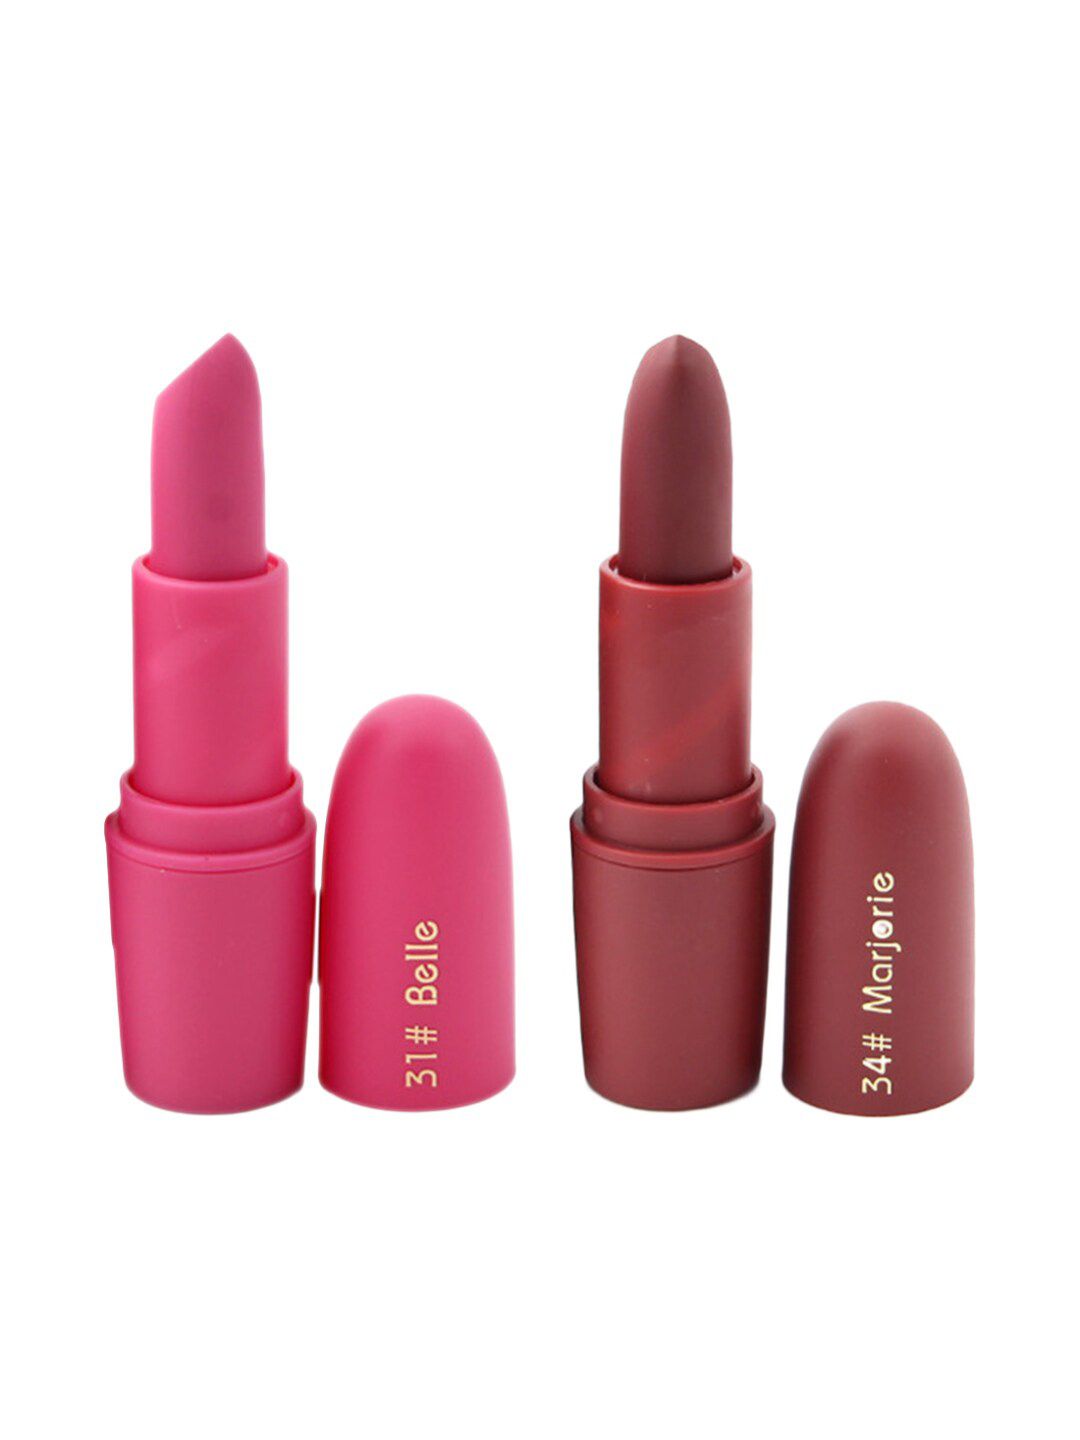 MISS ROSE Professional Make-Up Set of 2 Matte Creamy Lipsticks - Belle 31 & Marjorie 34 Price in India